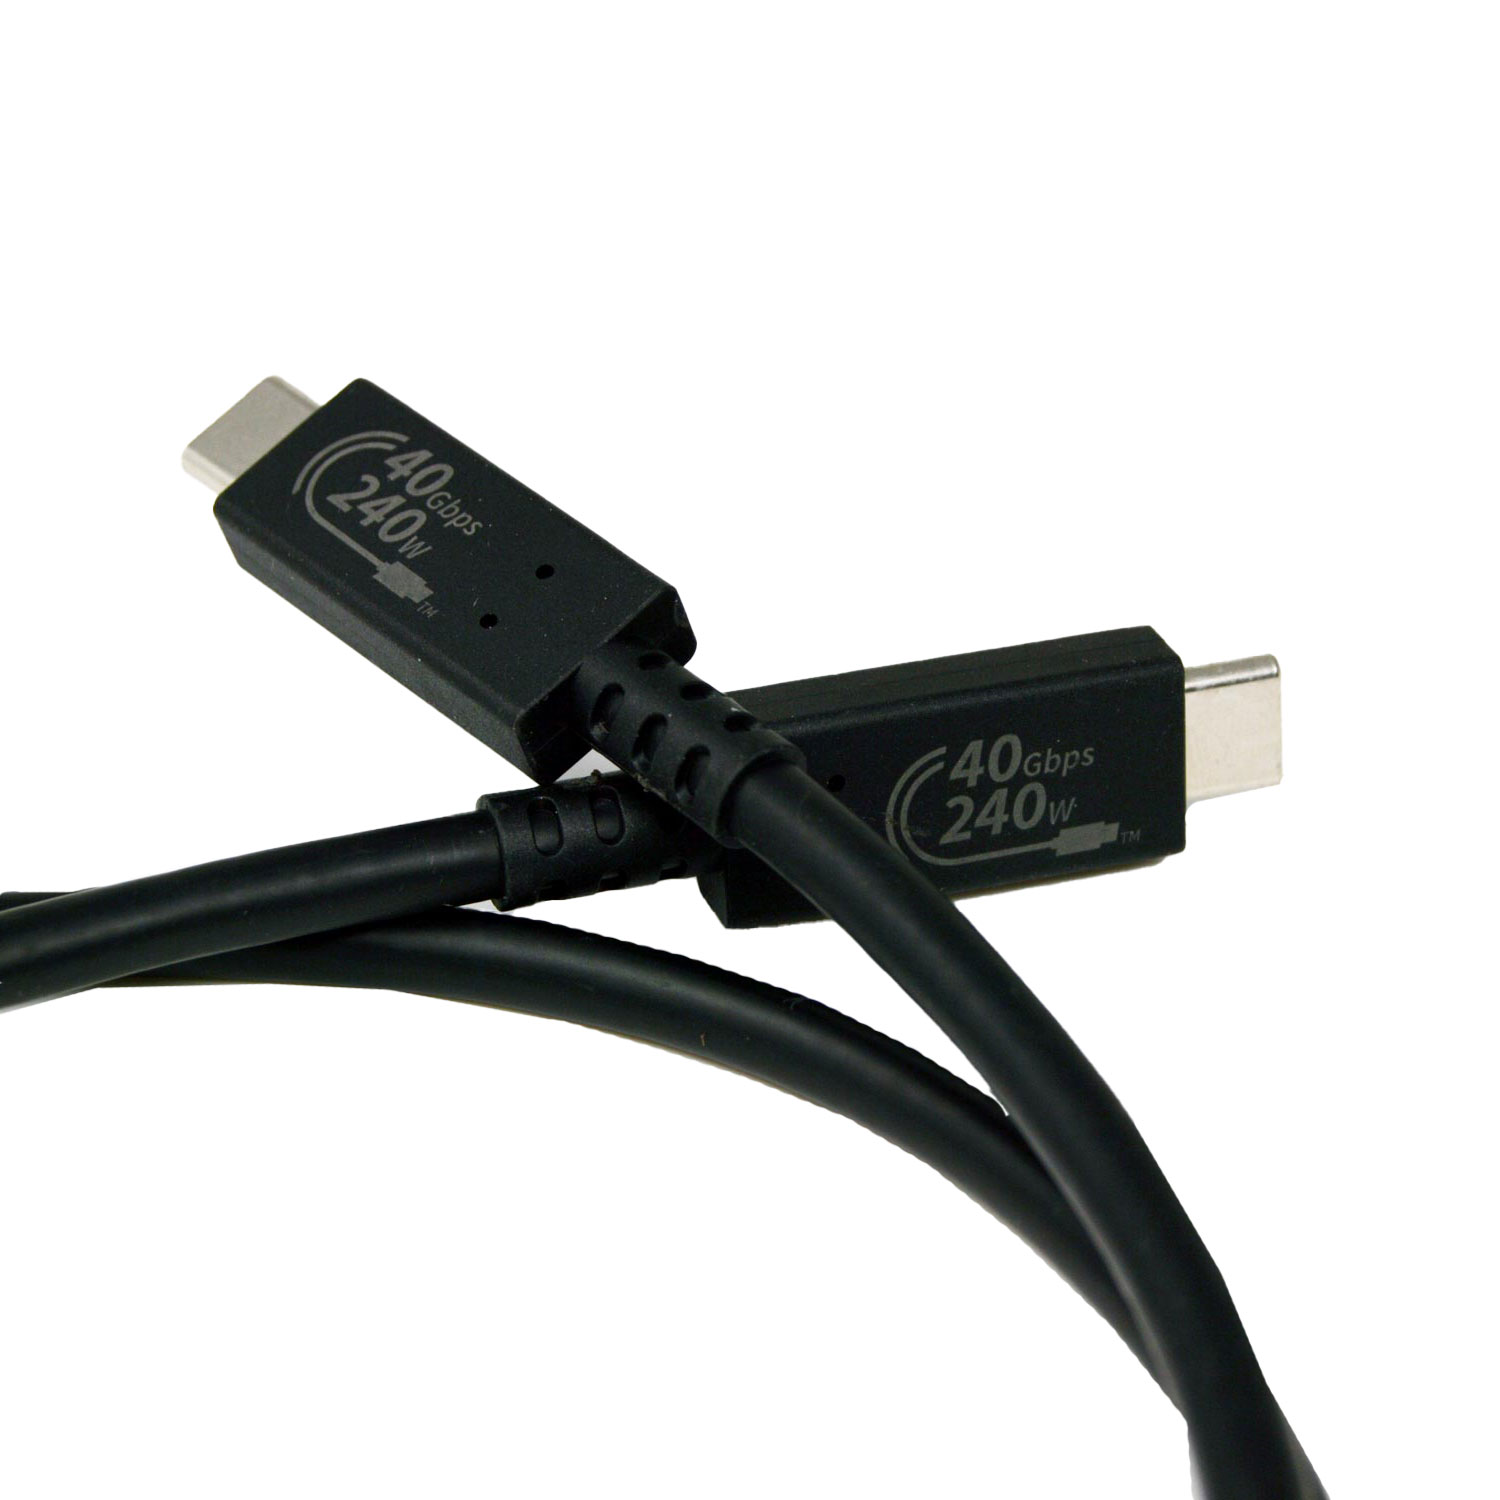 the part number is KMCX-USB4.0-MTOM-0.8M